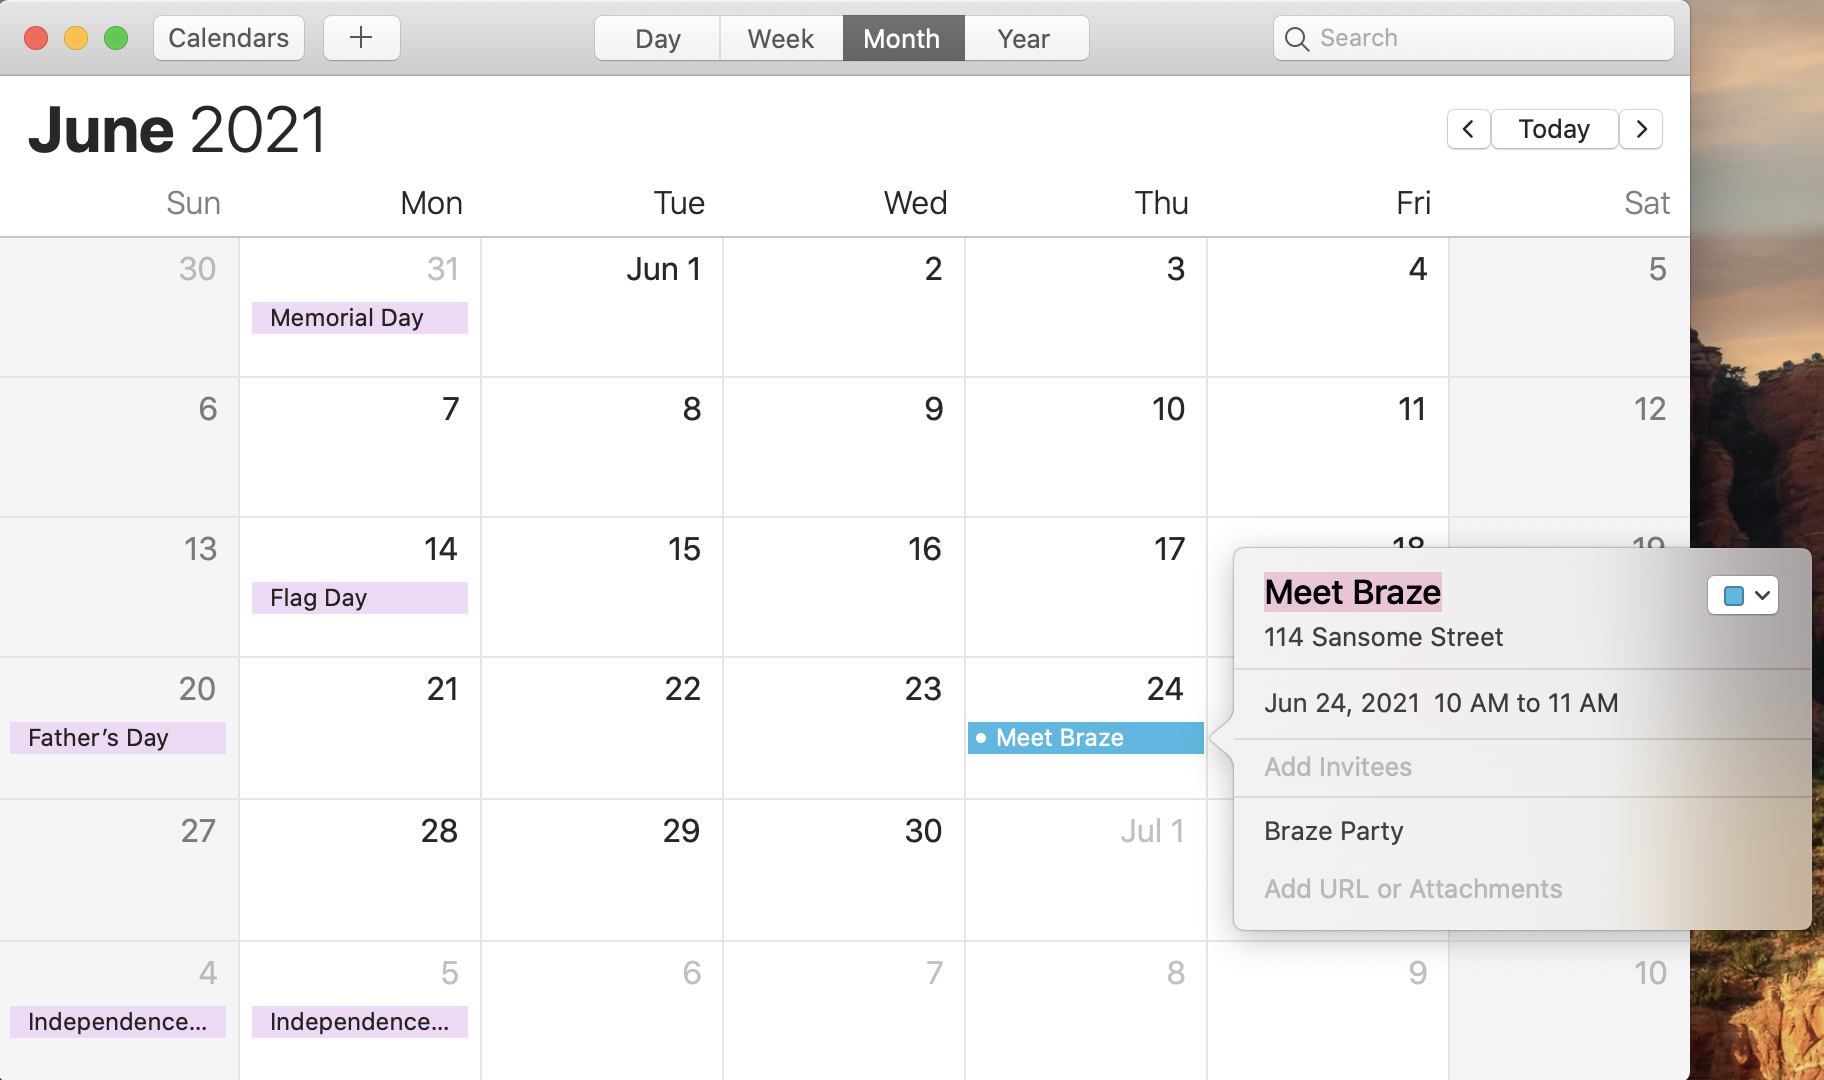 iCal calendar with the event added.